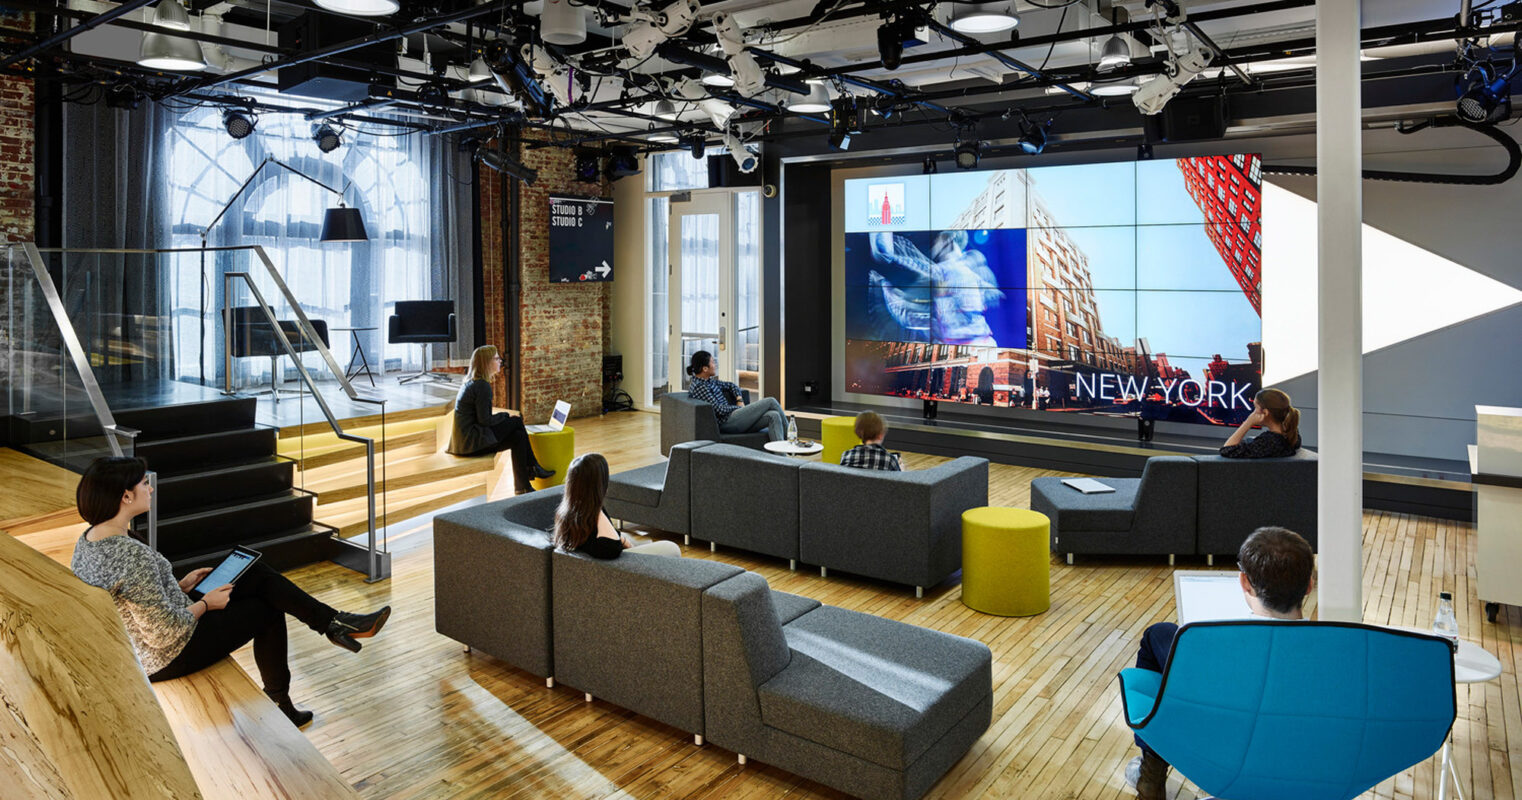 Contemporary office lounge with tiered seating, incorporating a mix of wood floors, exposed brick, industrial ceiling fixtures, and modern furniture, focused around a large video display wall.